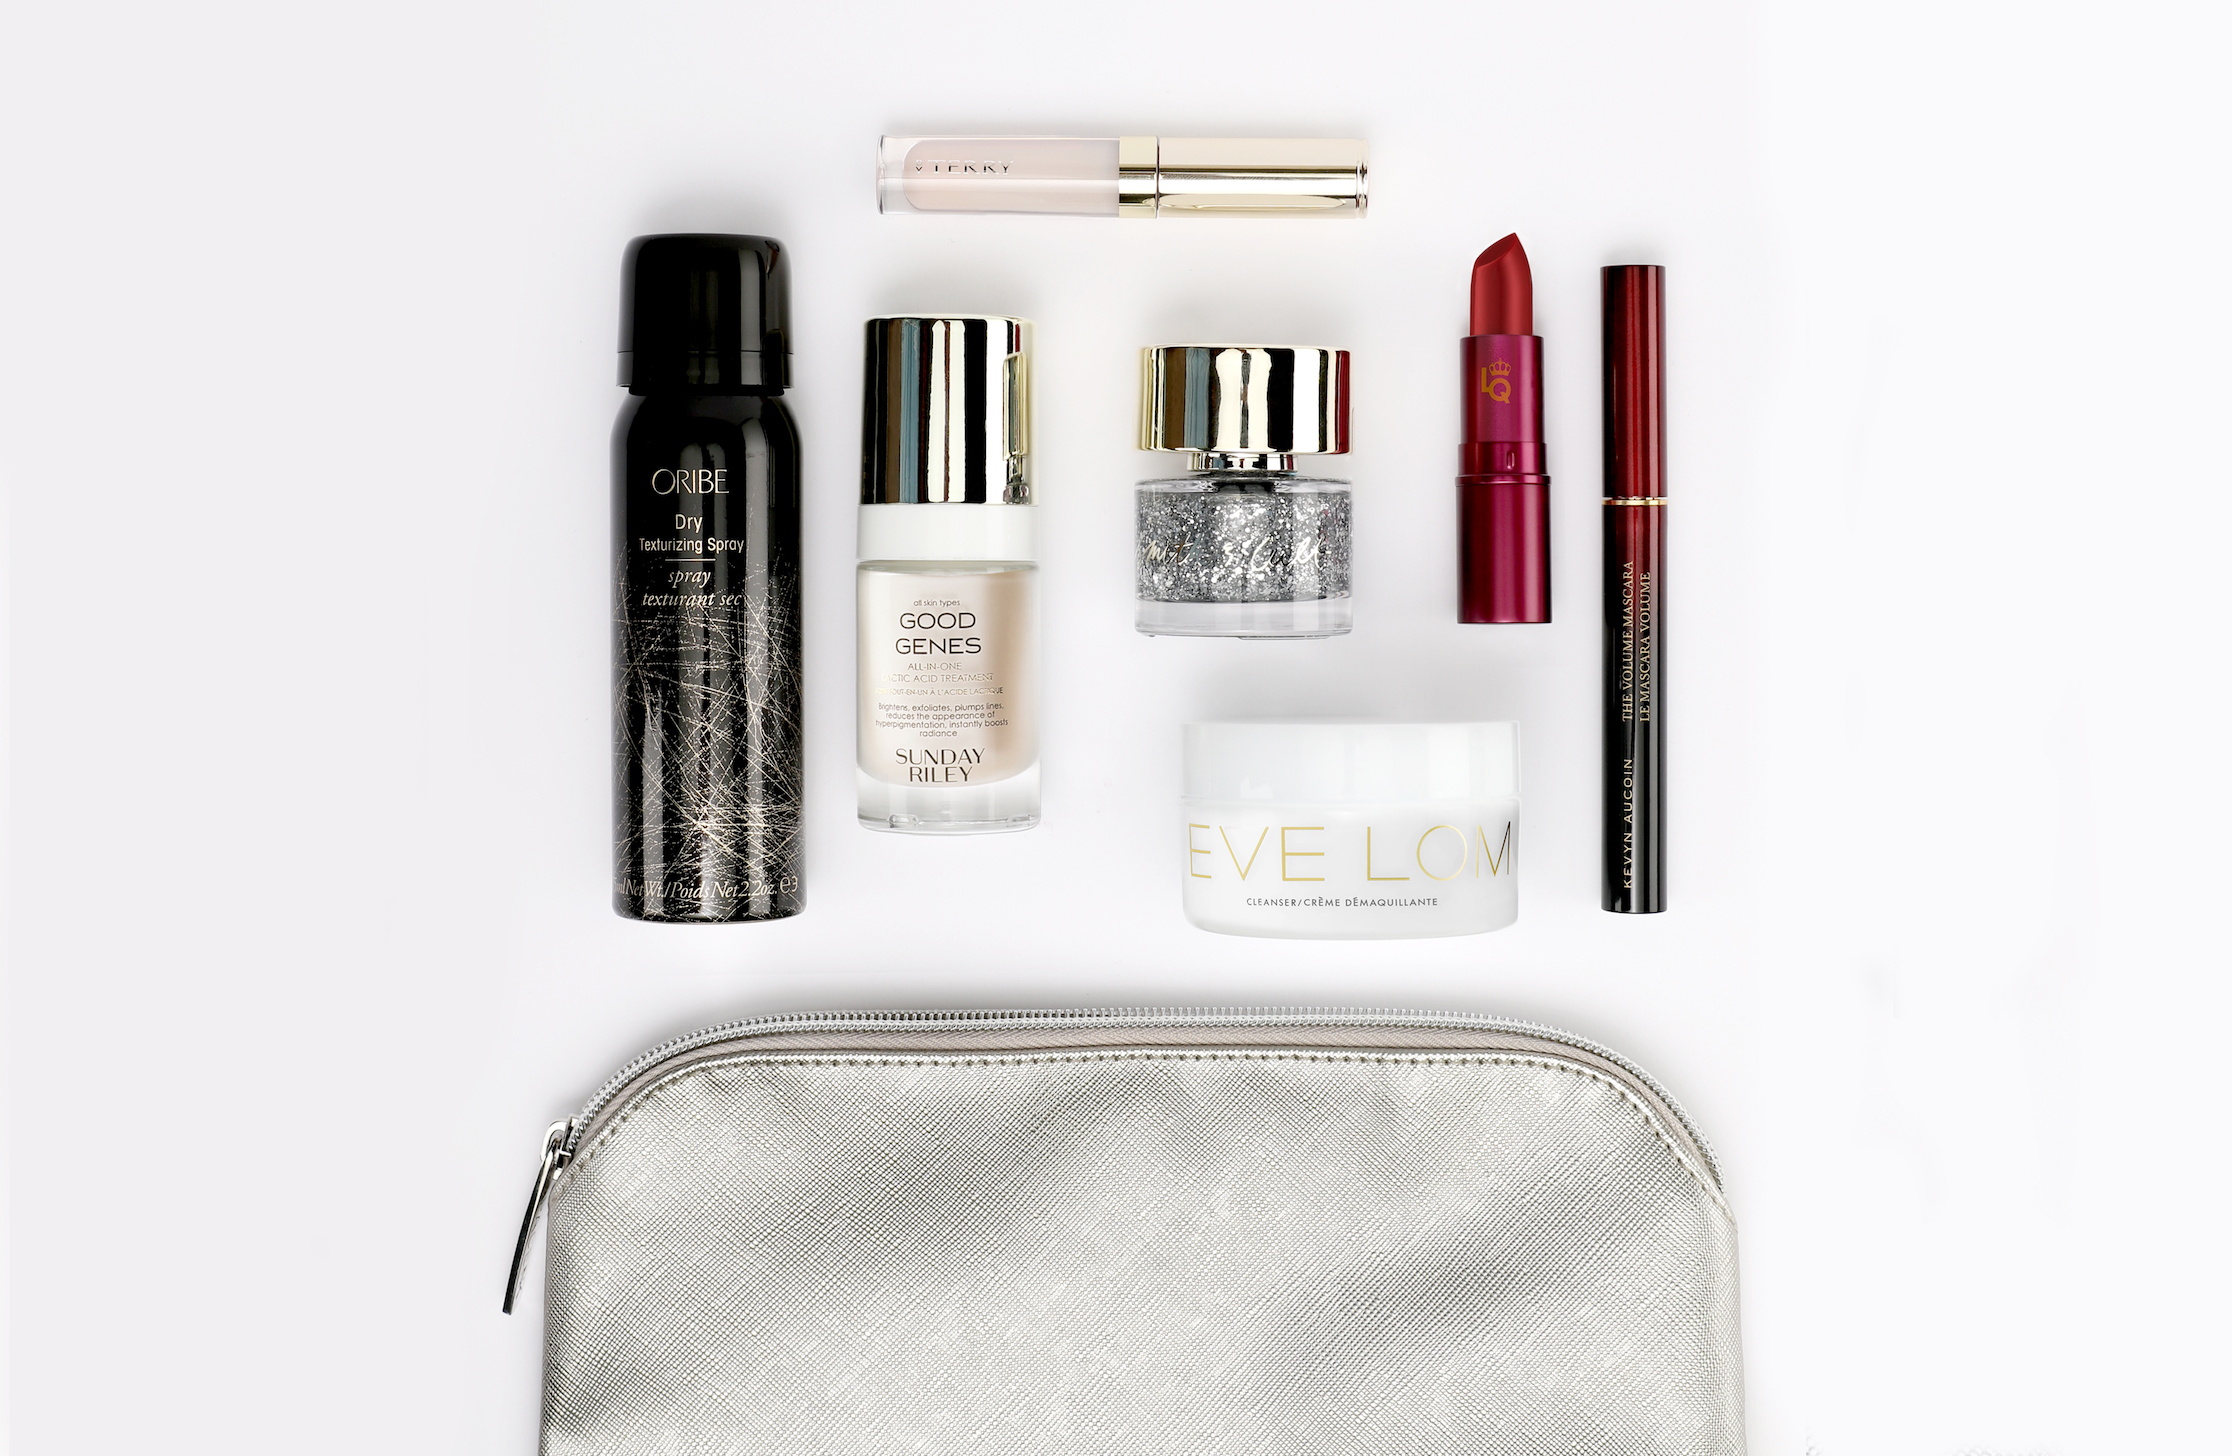 Space NK Holiday Heroes Silver Edition Collection Limited Edition ($99.00 with a $225.00 value)